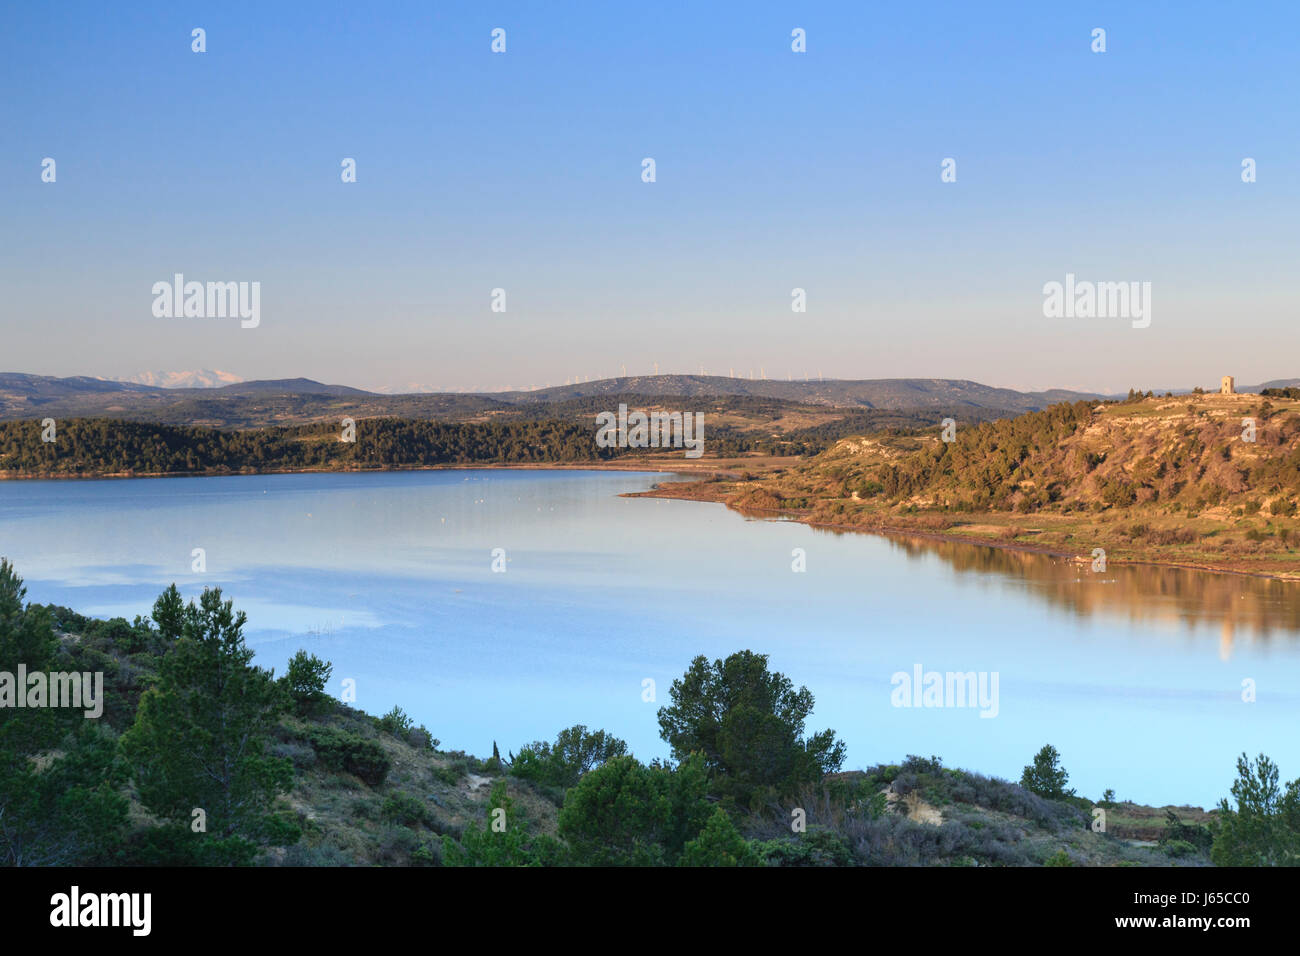 France, Aude, Peyriac-de-Mer, mere of Bages-Sigean seen from the hill of Mour Stock Photo